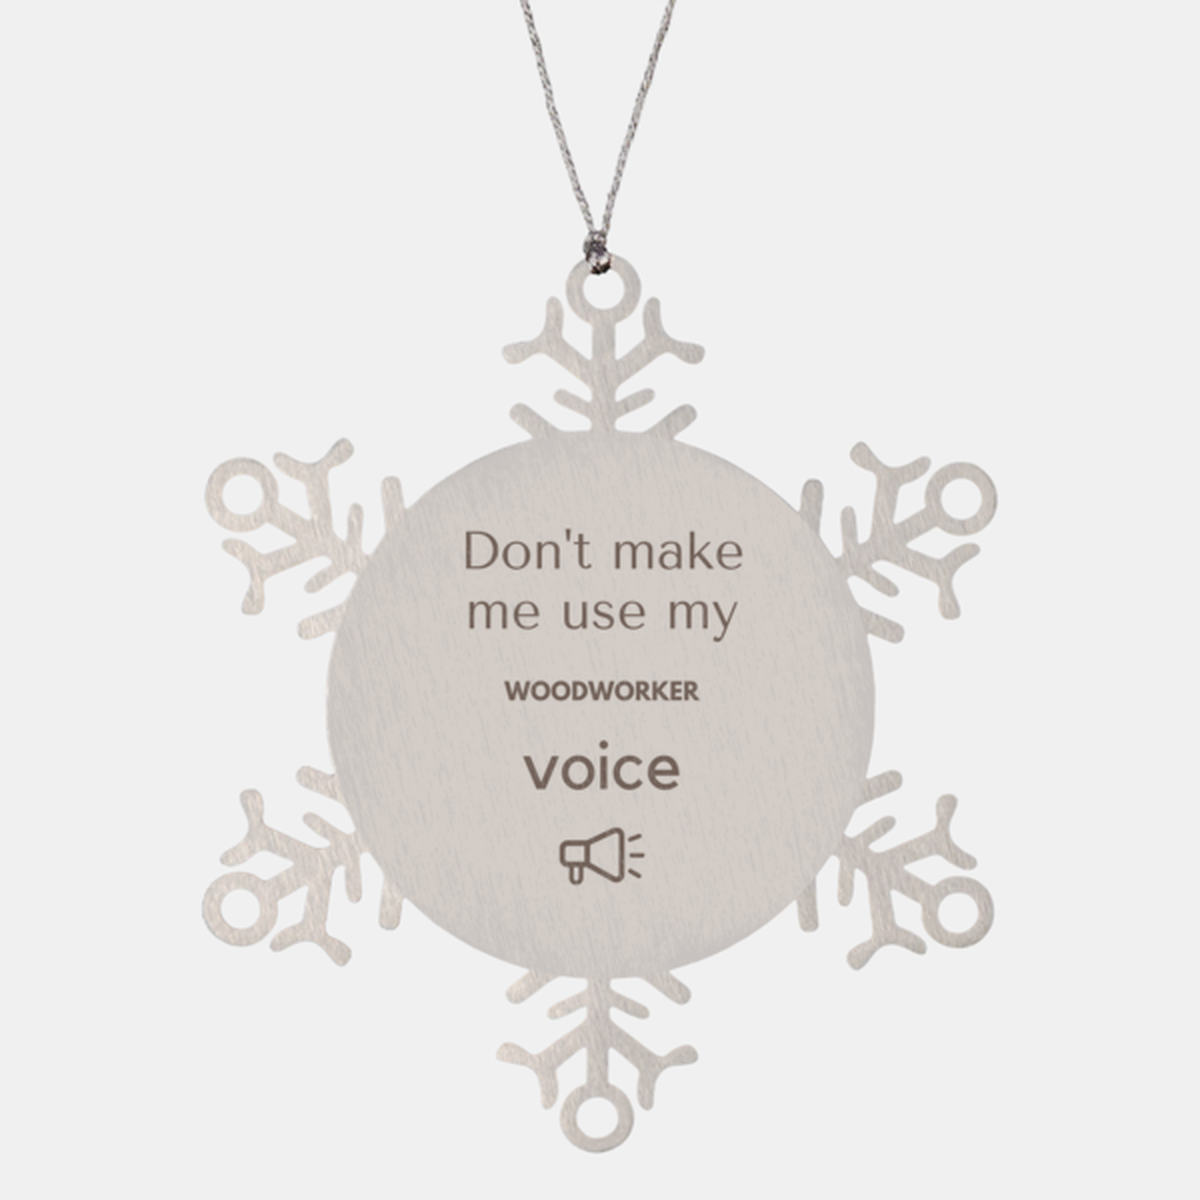 Don't make me use my Woodworker voice, Sarcasm Woodworker Ornament Gifts, Christmas Woodworker Snowflake Ornament Unique Gifts For Woodworker Coworkers, Men, Women, Colleague, Friends